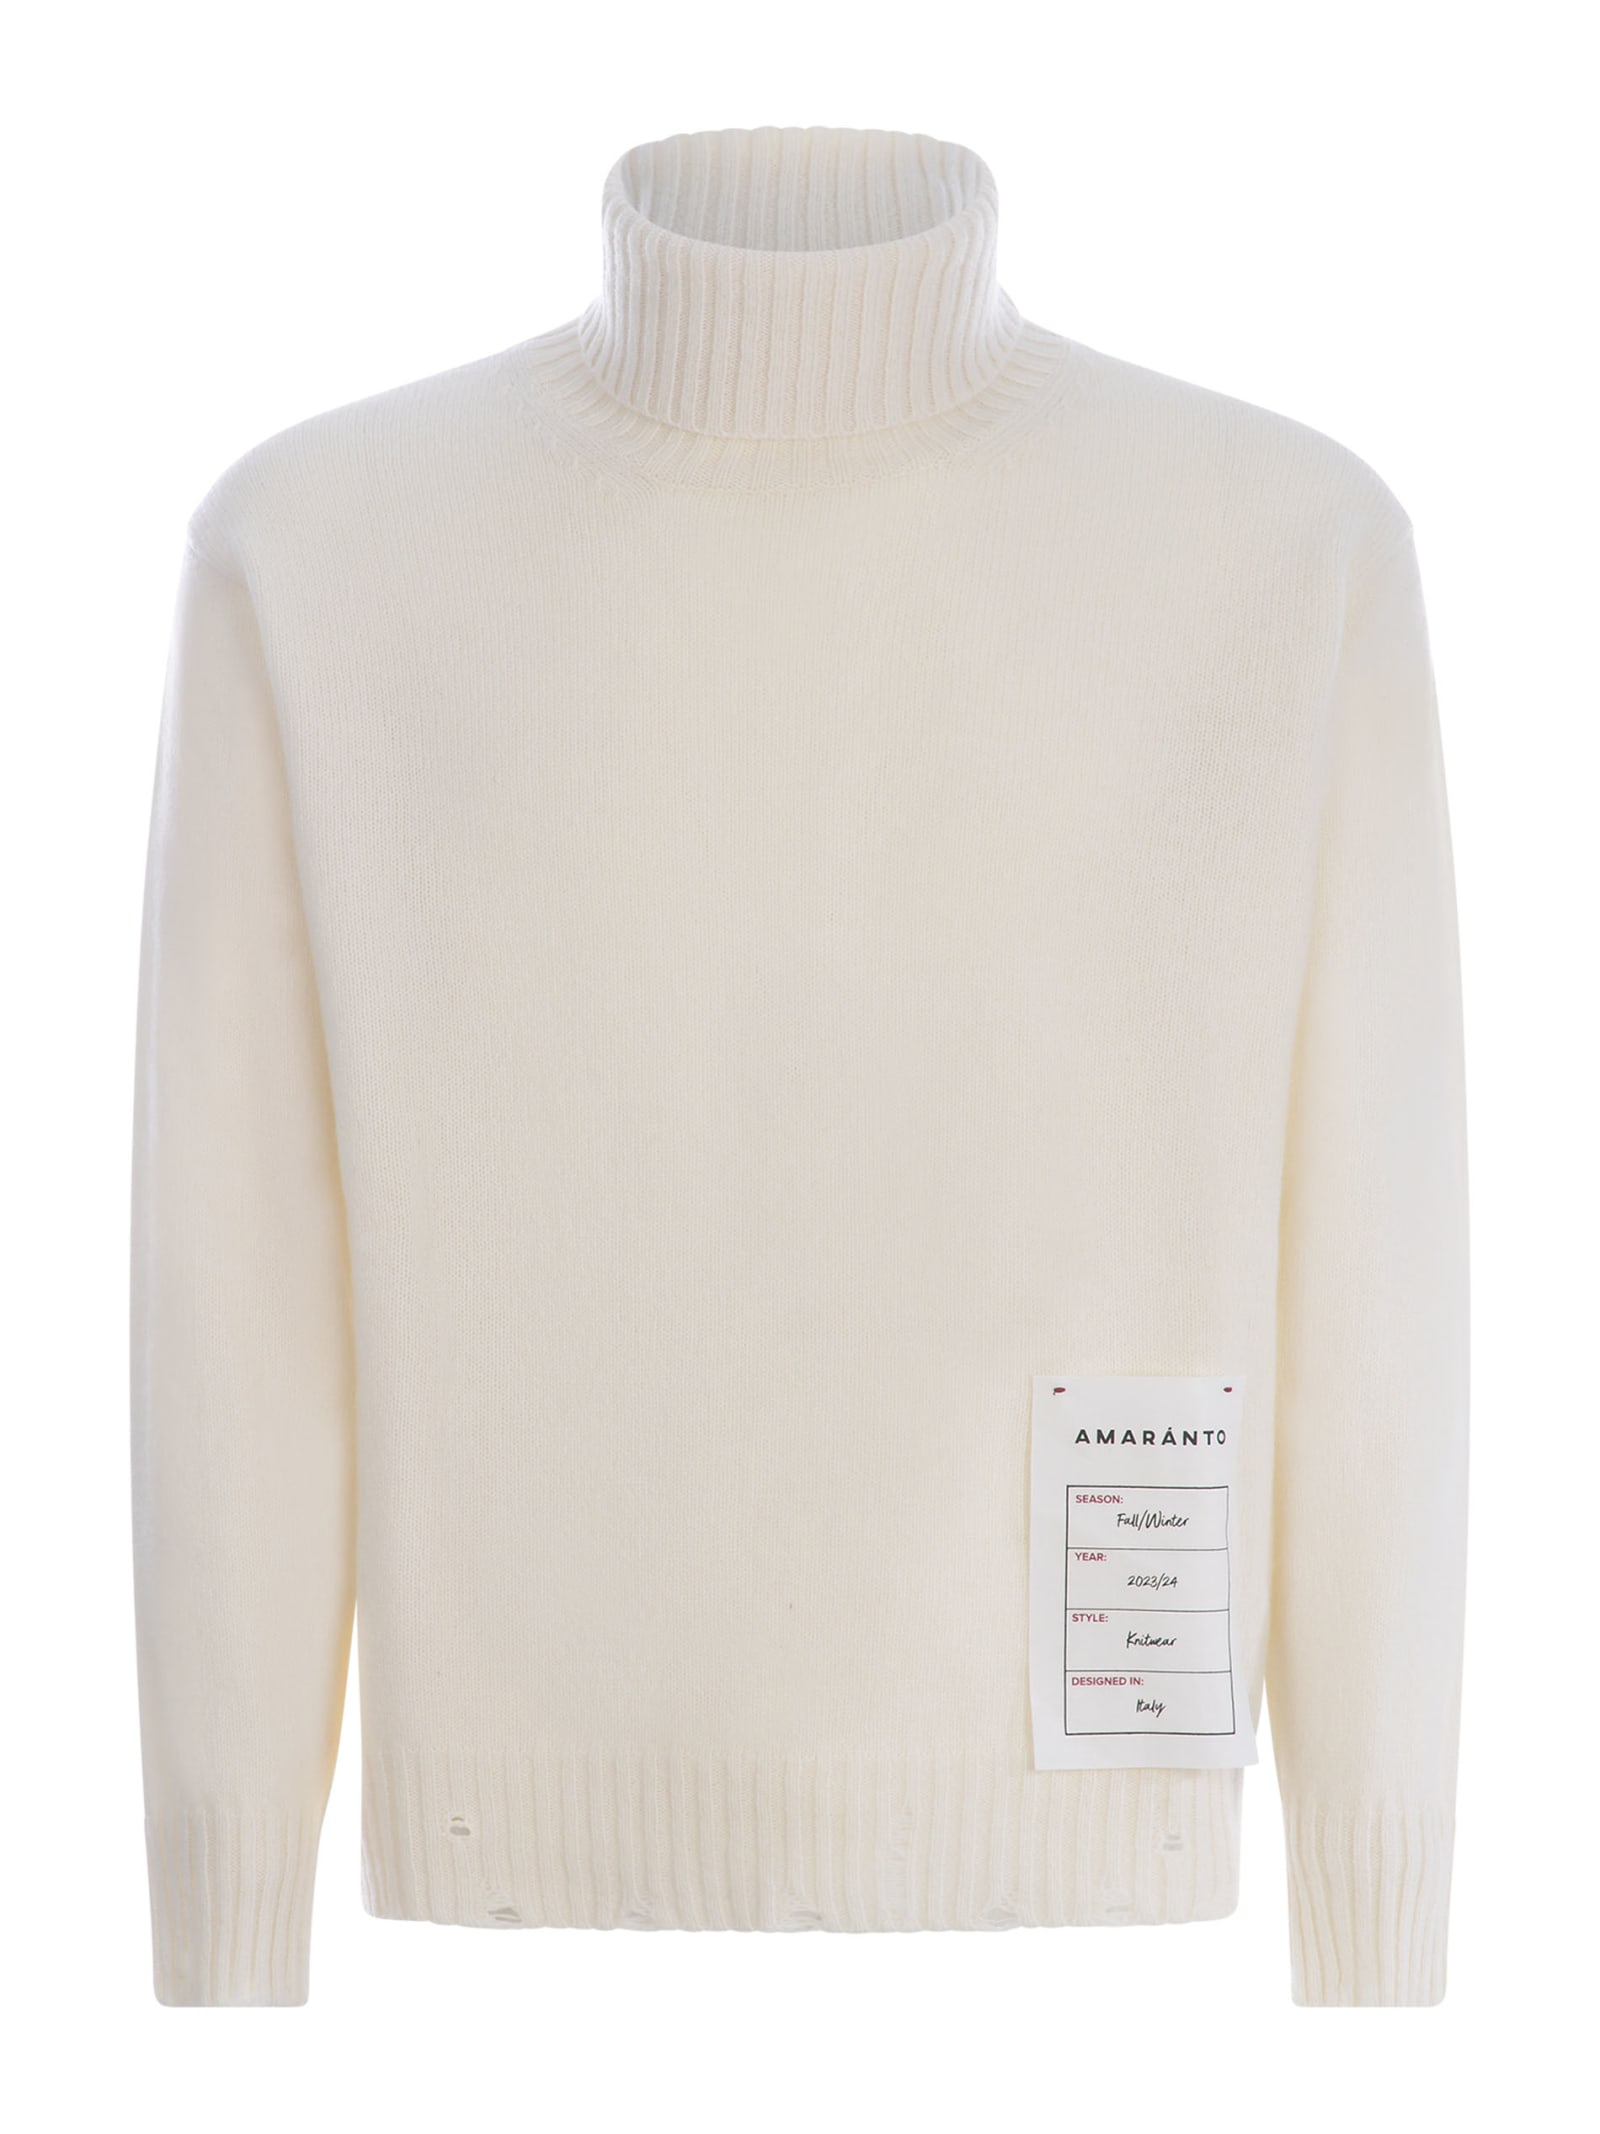 Turtleneck Amaranto In Wool And Cashmere Blend